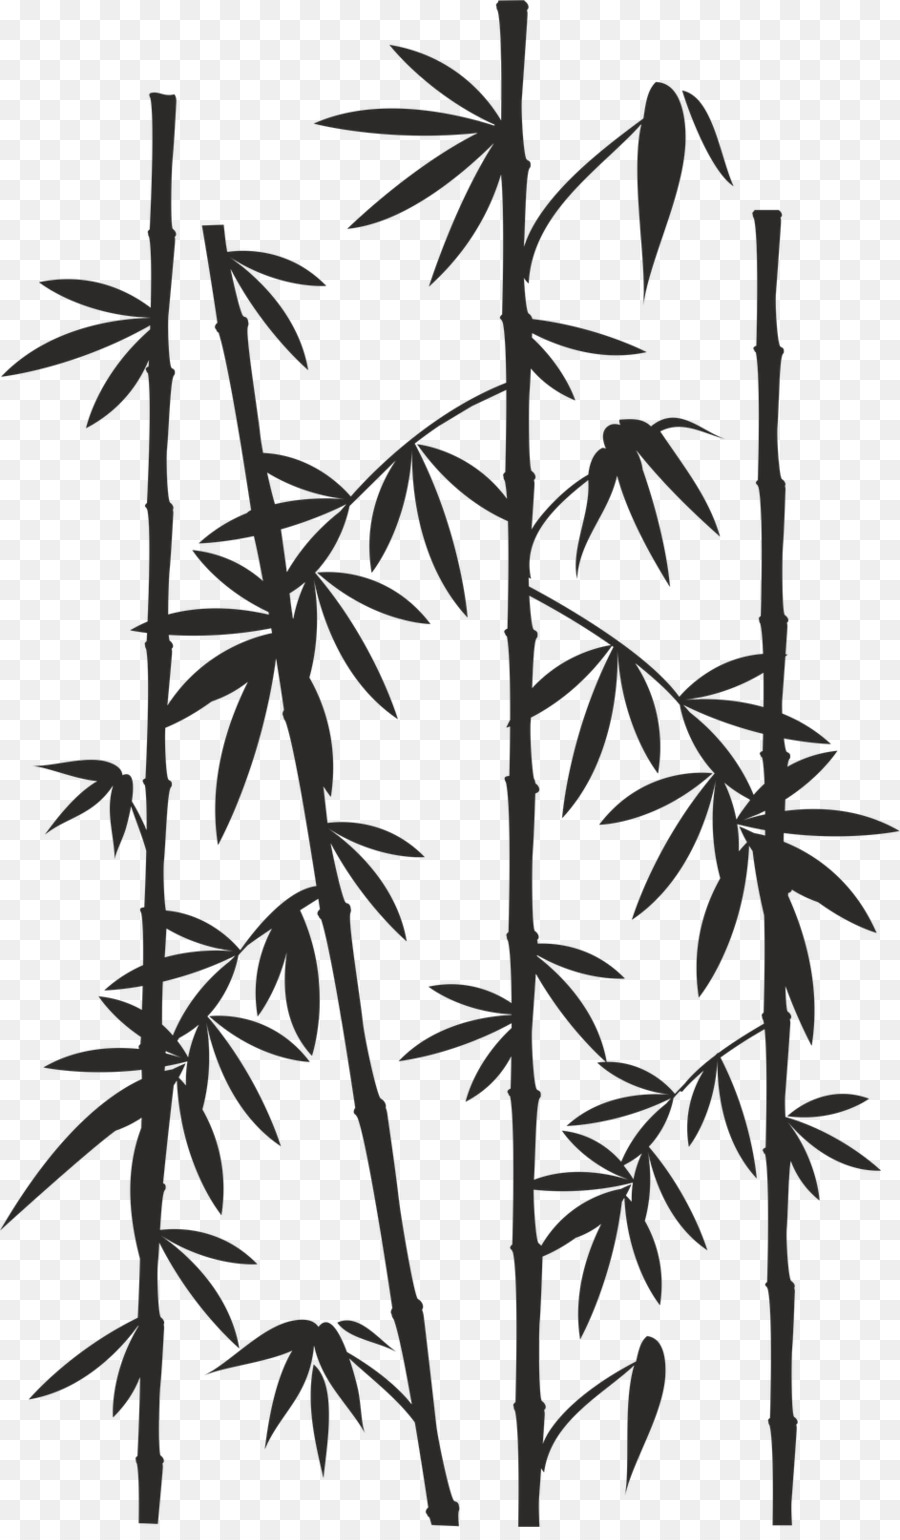 Bamboo Image Drawing Reed Silhouette - bamboo png download - 943*1600 - Free Transparent Bamboo png Download.